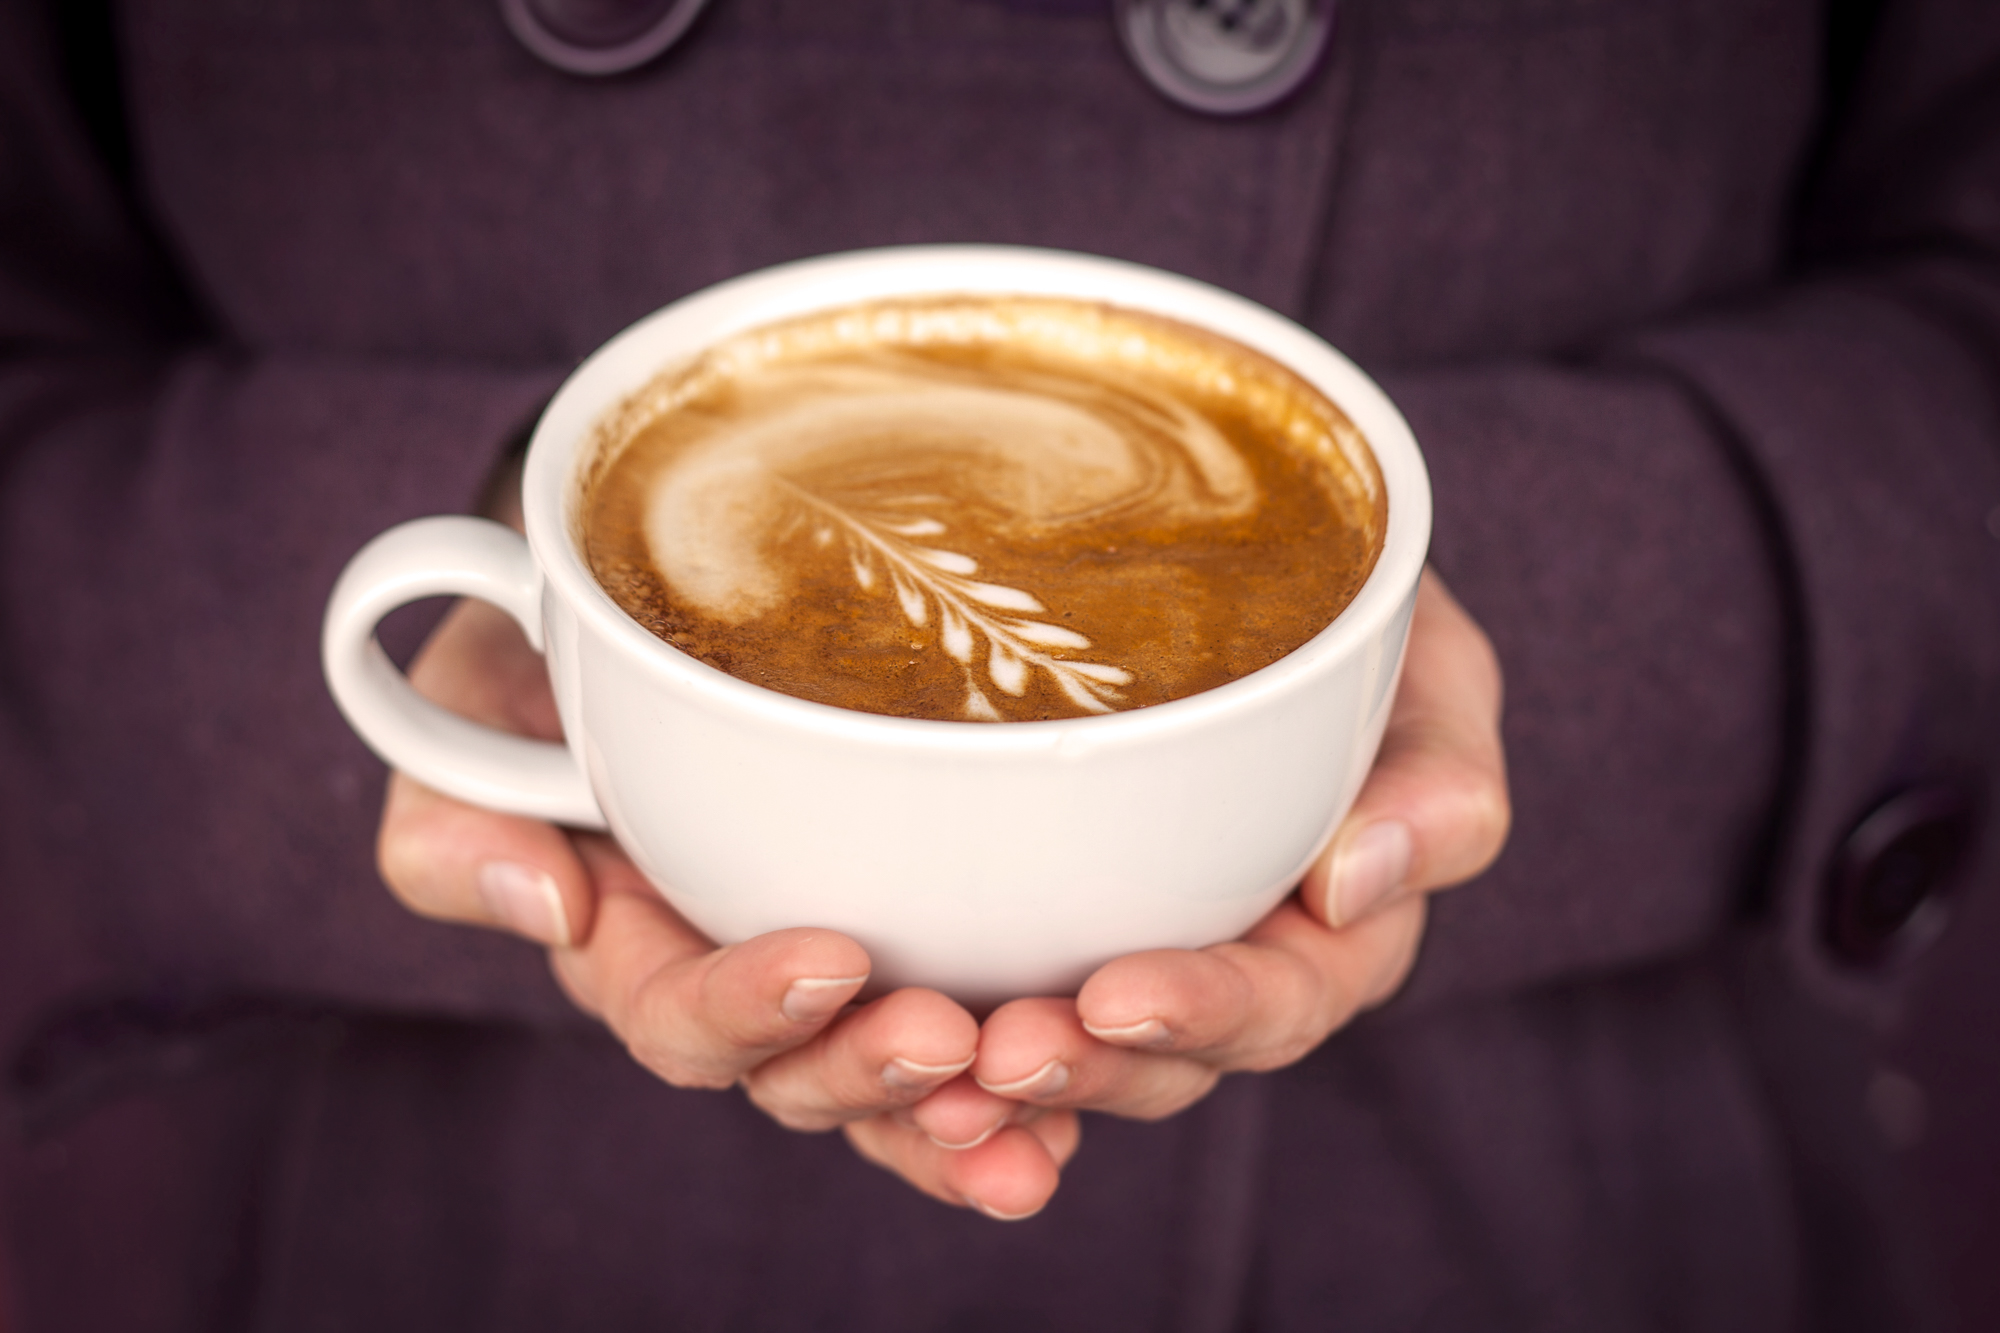 A cup of espresso with fancy cream in the shape of a branch being held in two hands